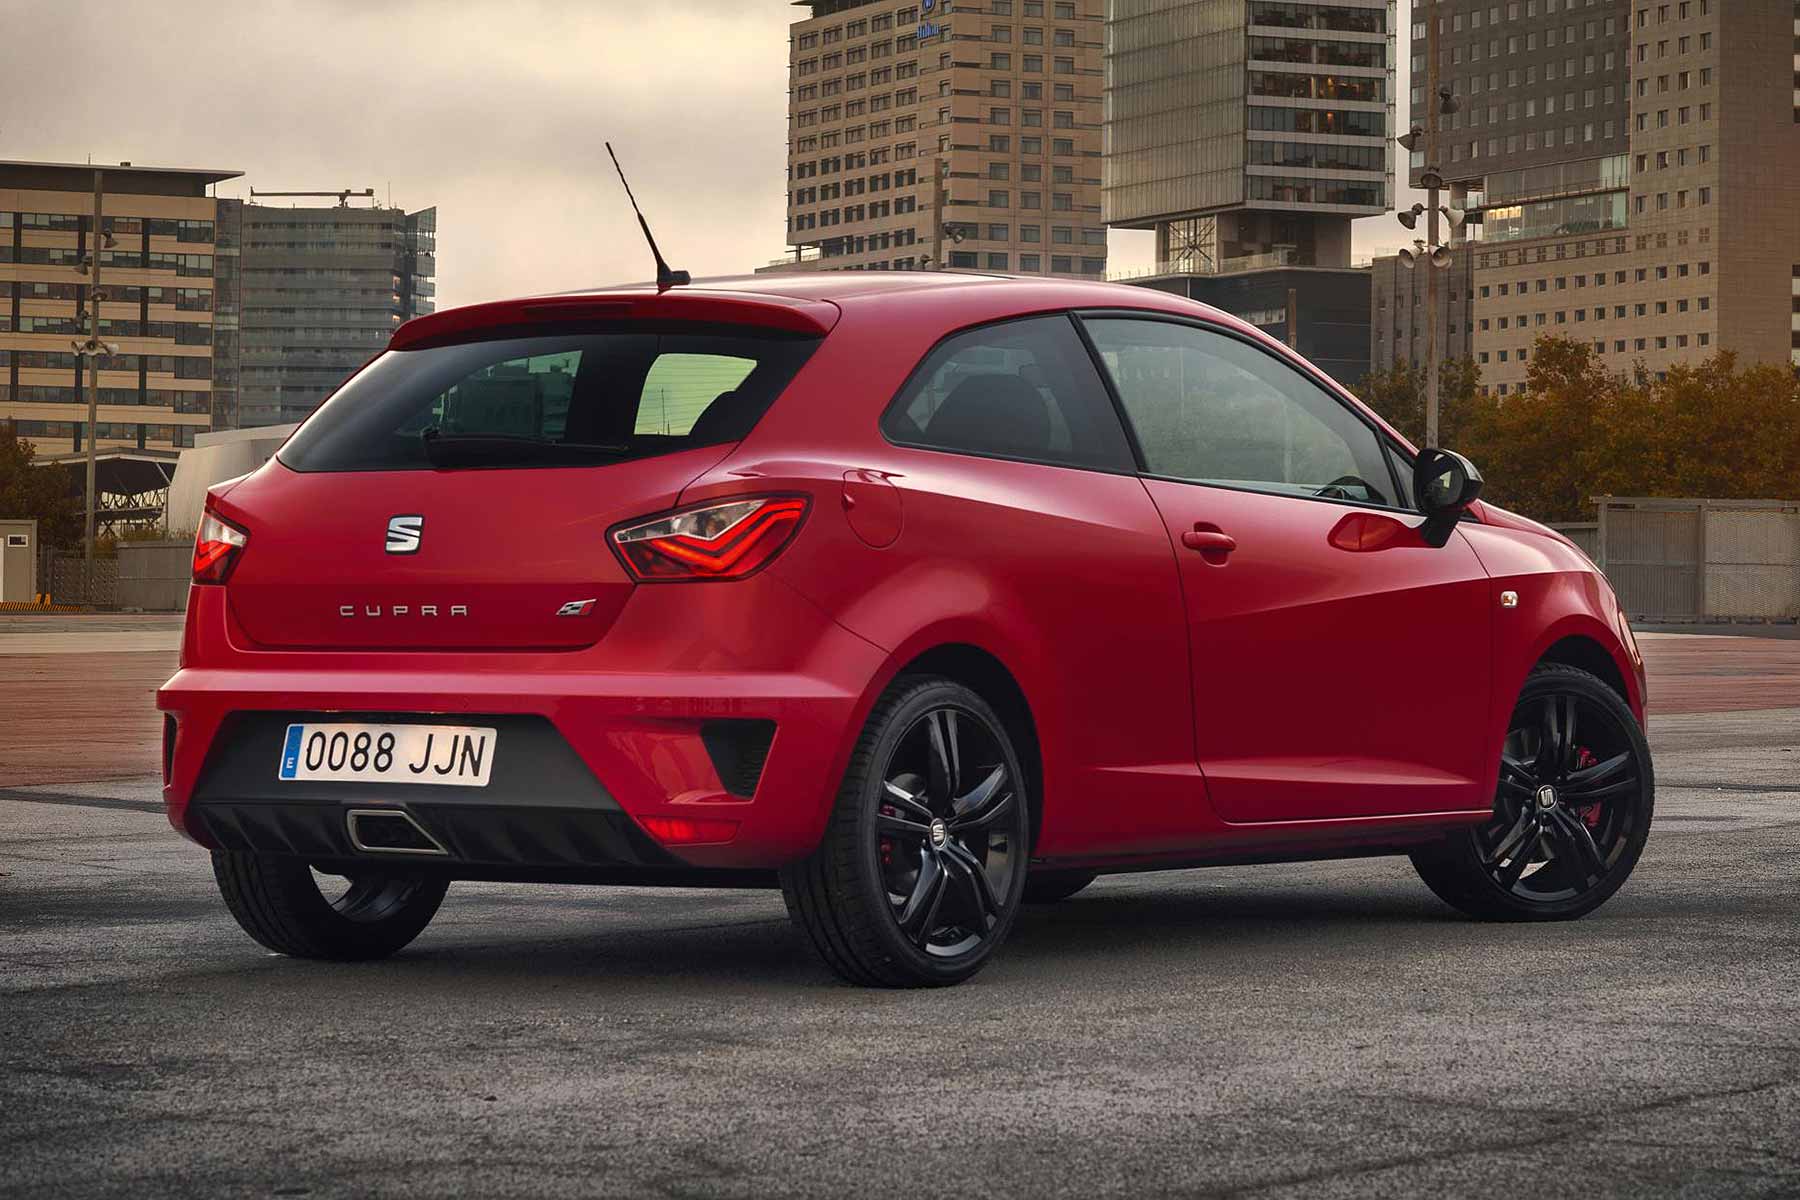 New SEAT Ibiza Cupra priced LESS than car it replaces | Motoring Research